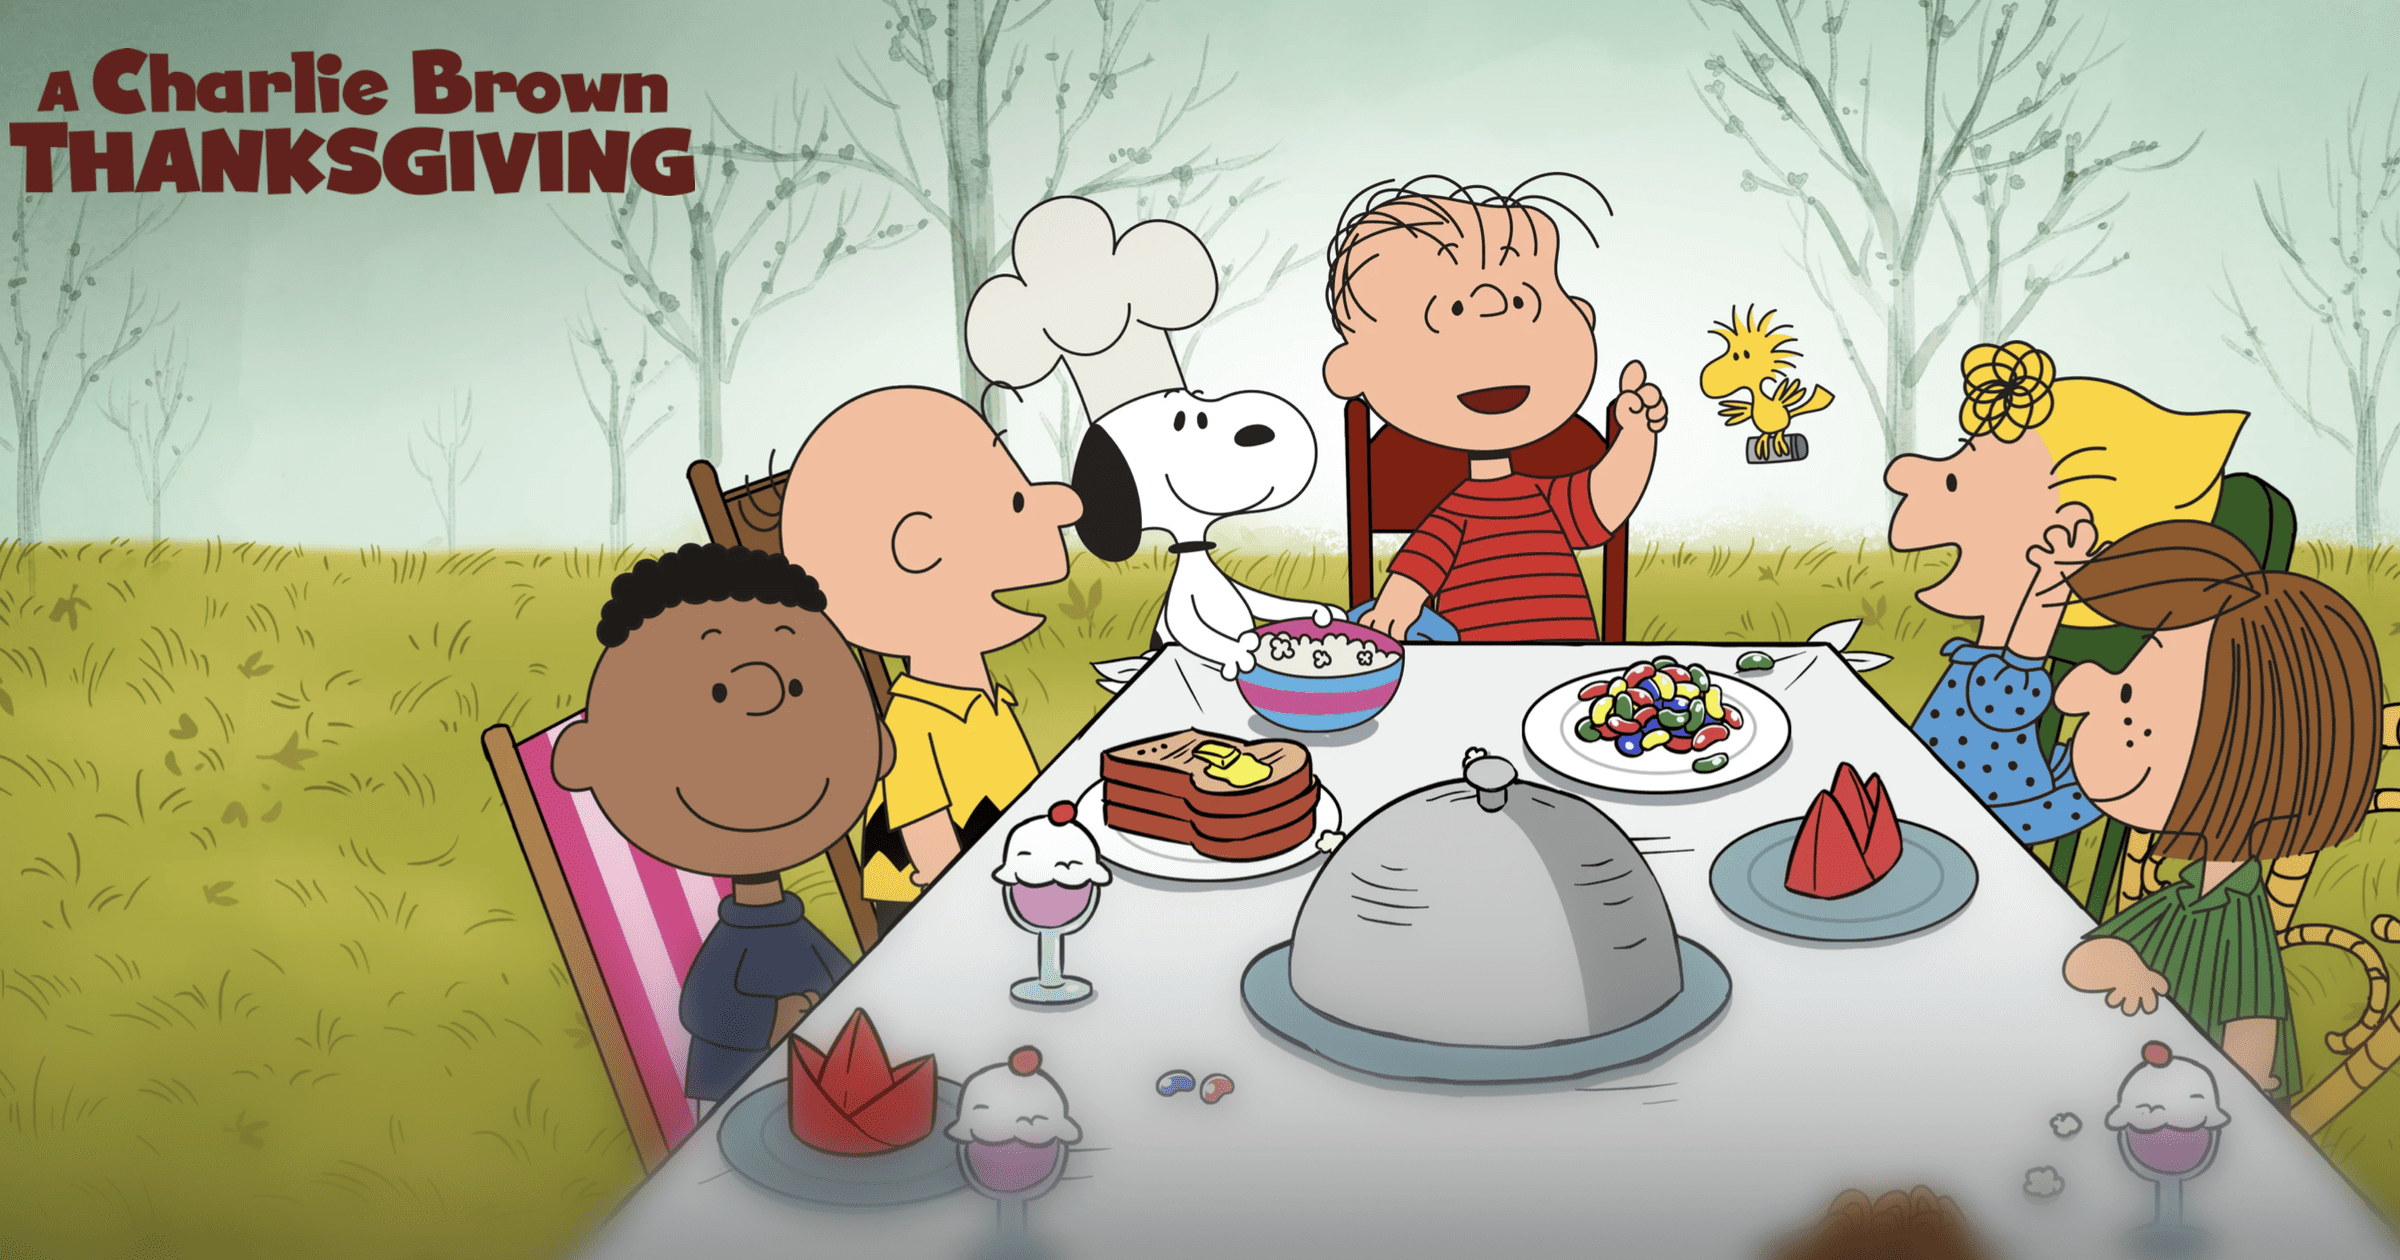 Watch 'A Charlie Brown Thanksgiving' For Free Via Apple TV The Mac